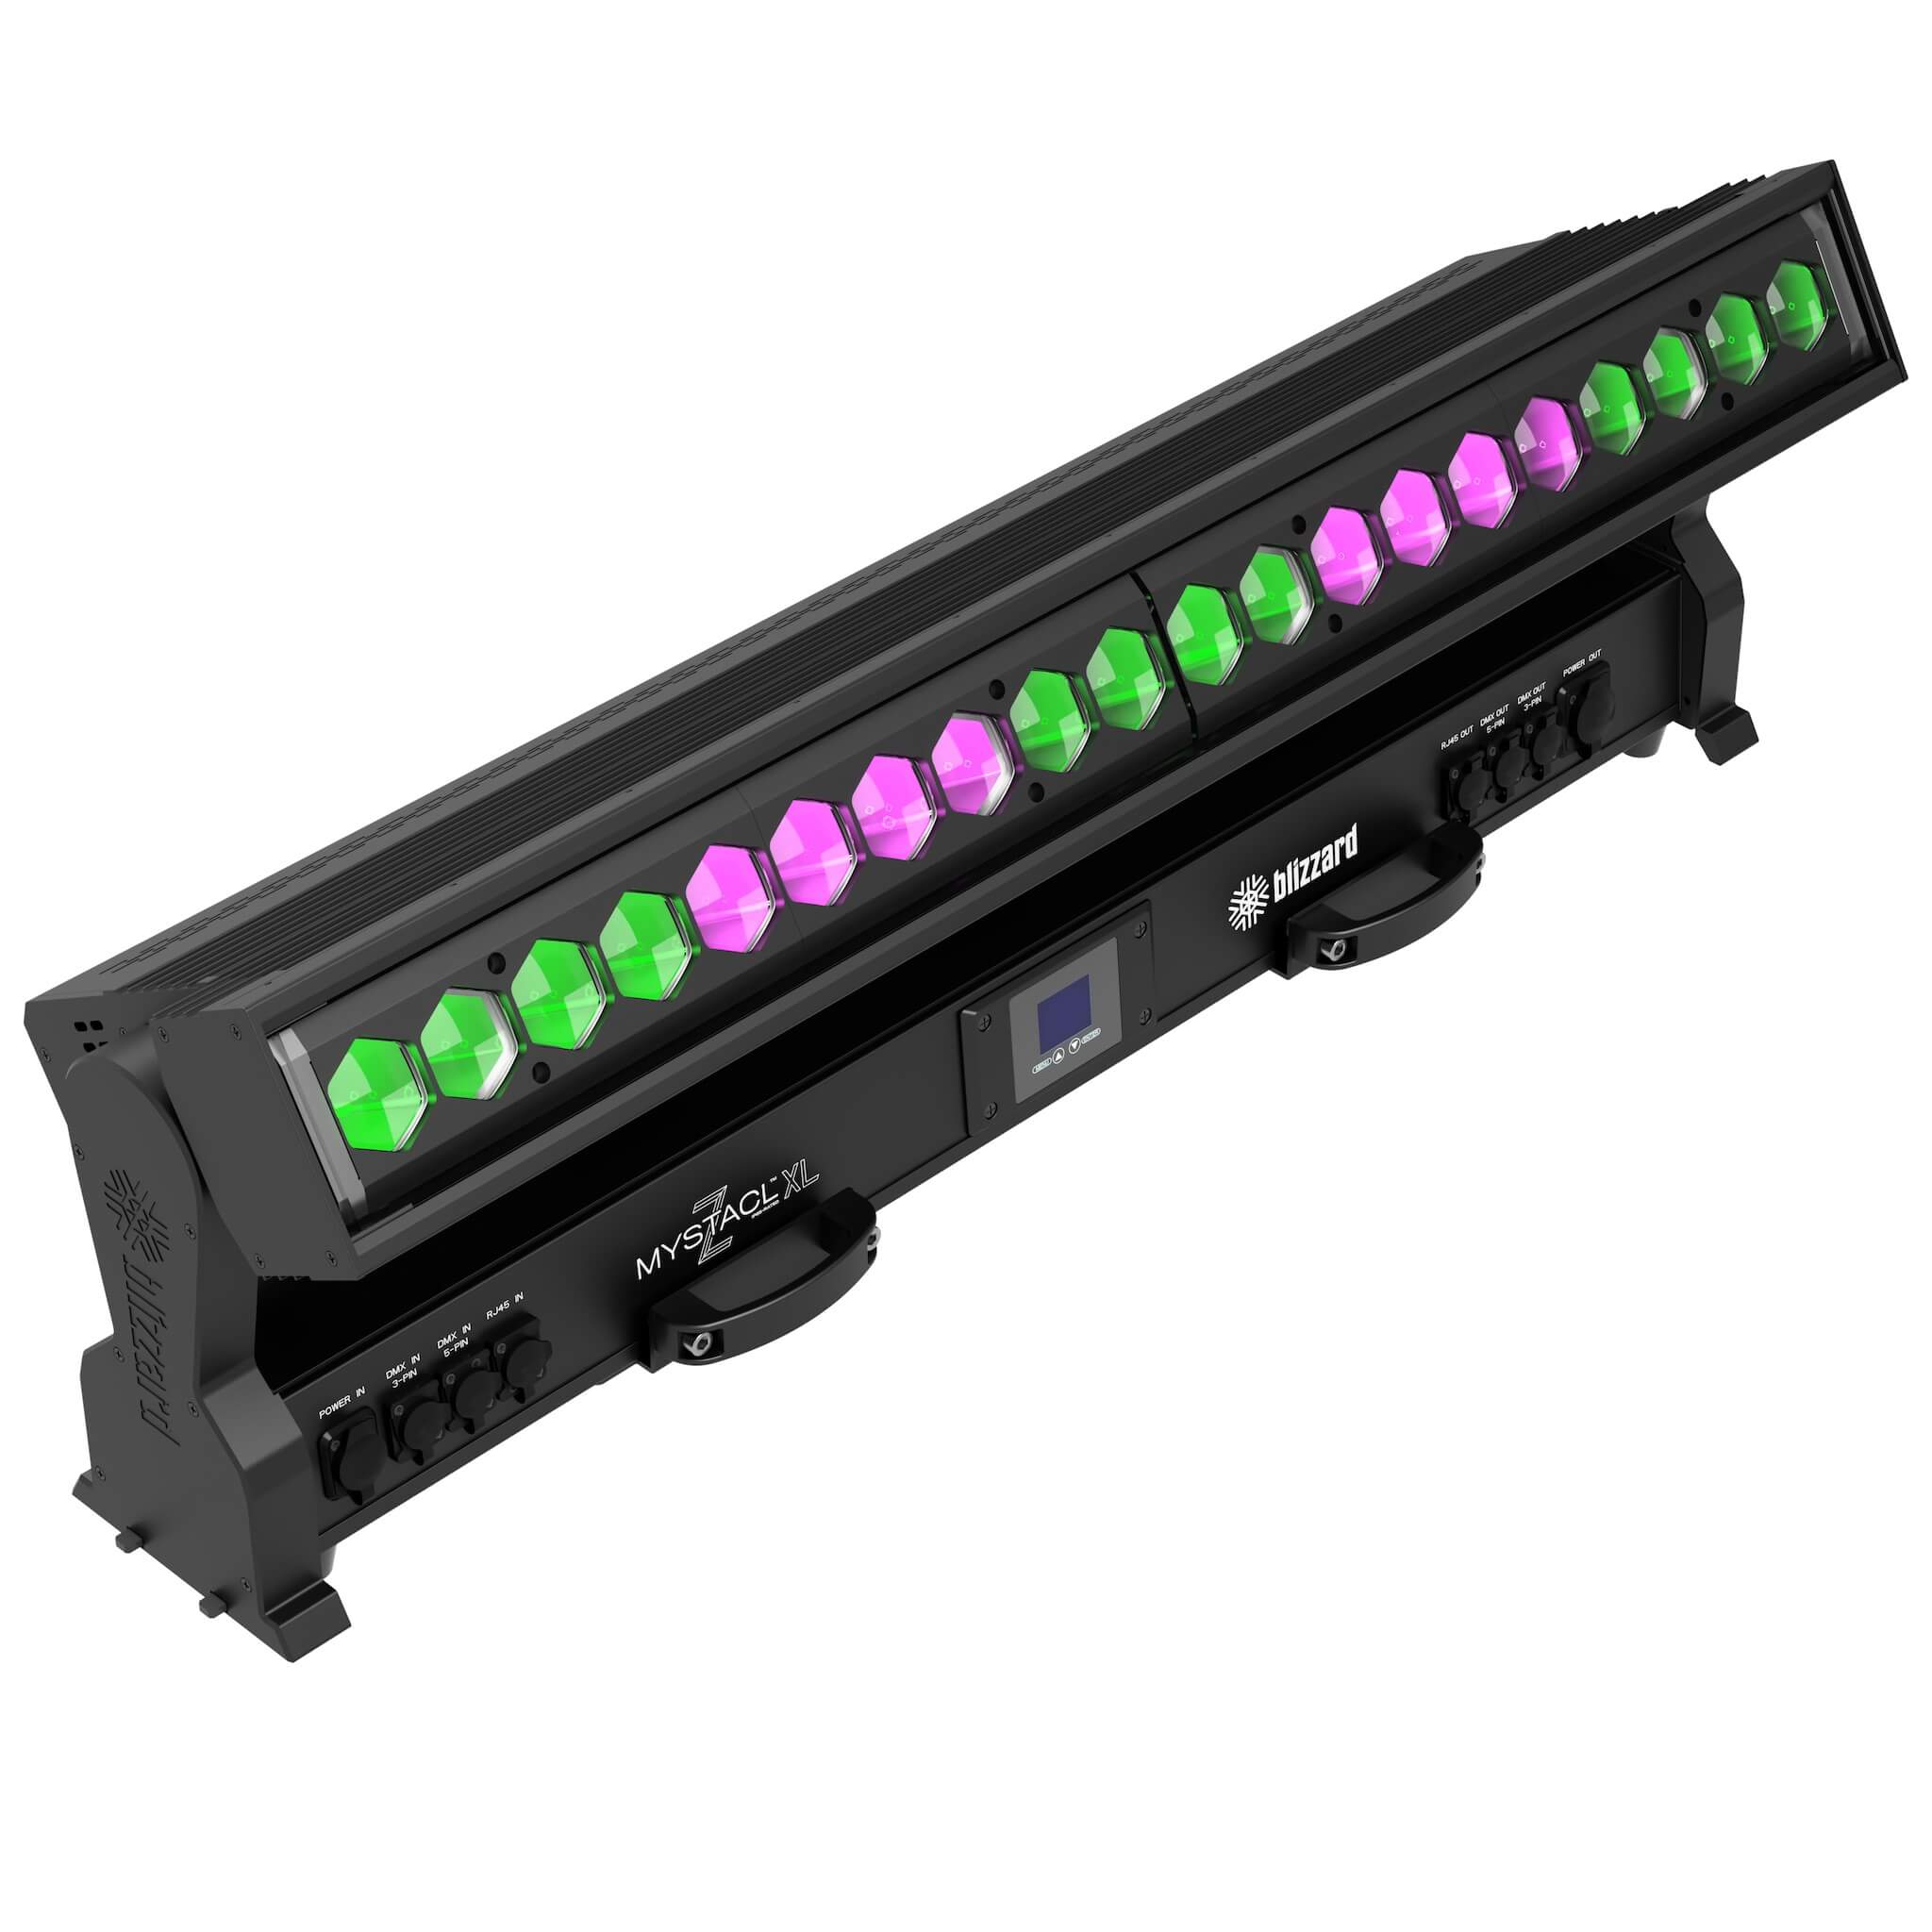 Blizzard Lighting MystACL Z IP XL - LED Moving Head Zoomable Batten, illuminated green and pink